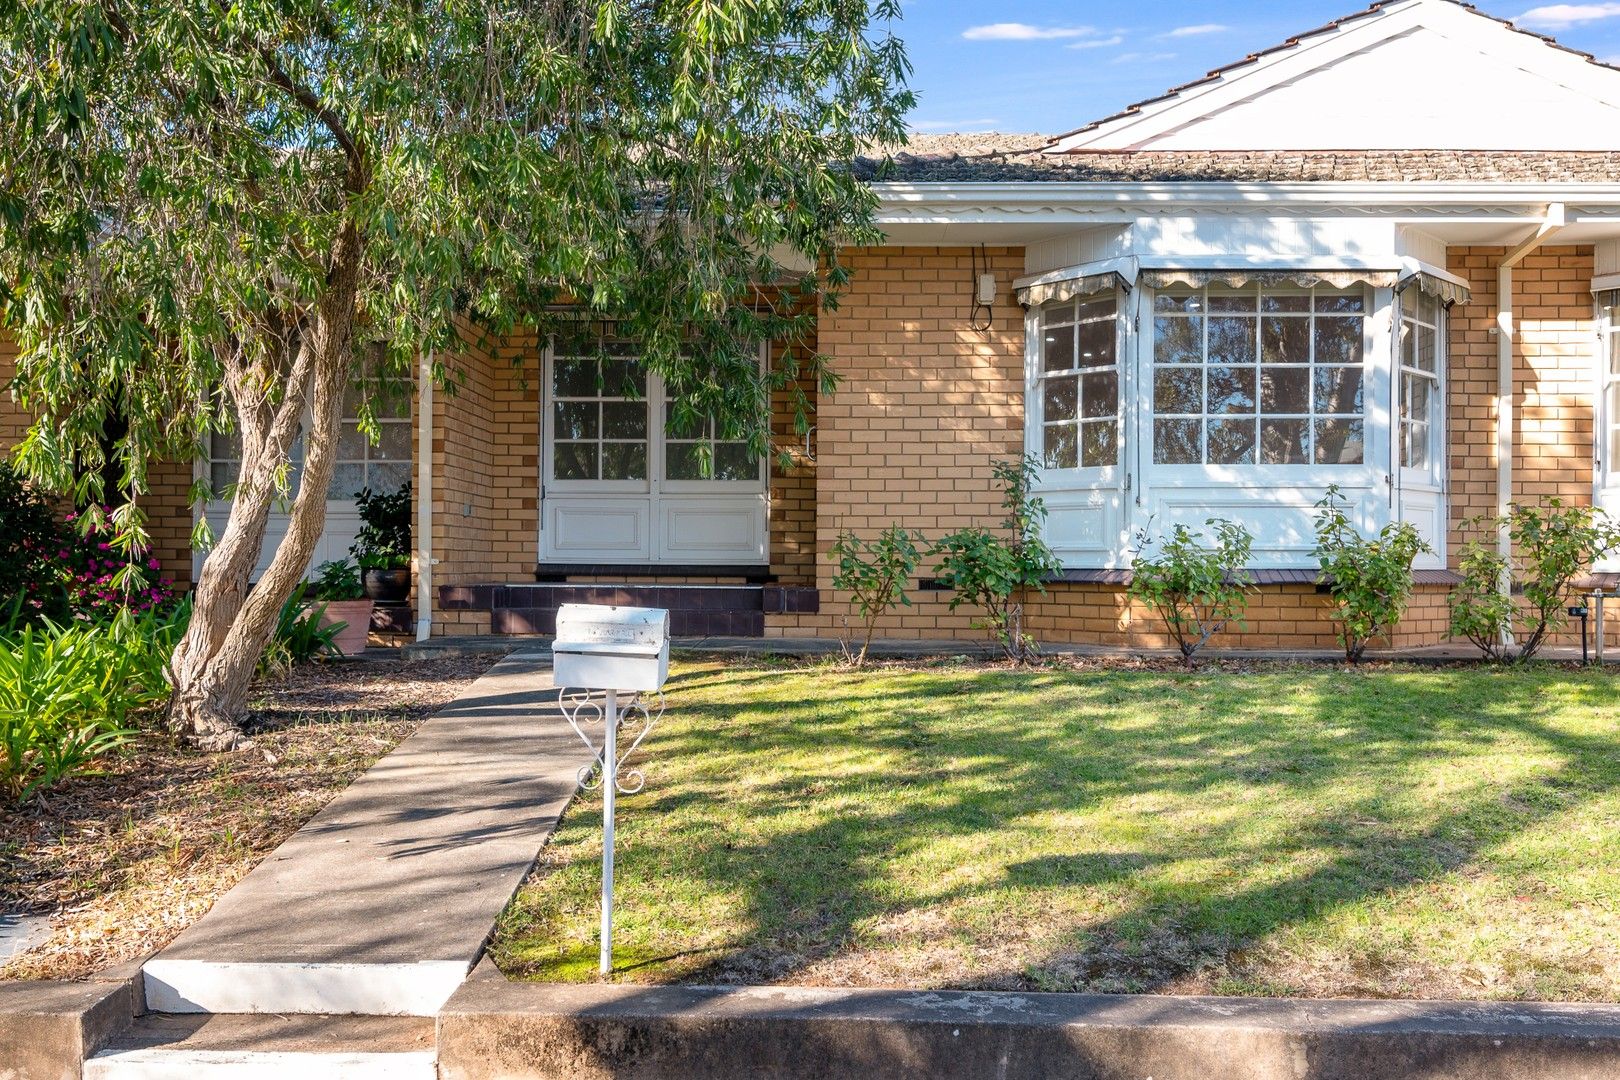 2 bedrooms House in 4/20 Young Street BURNSIDE SA, 5066